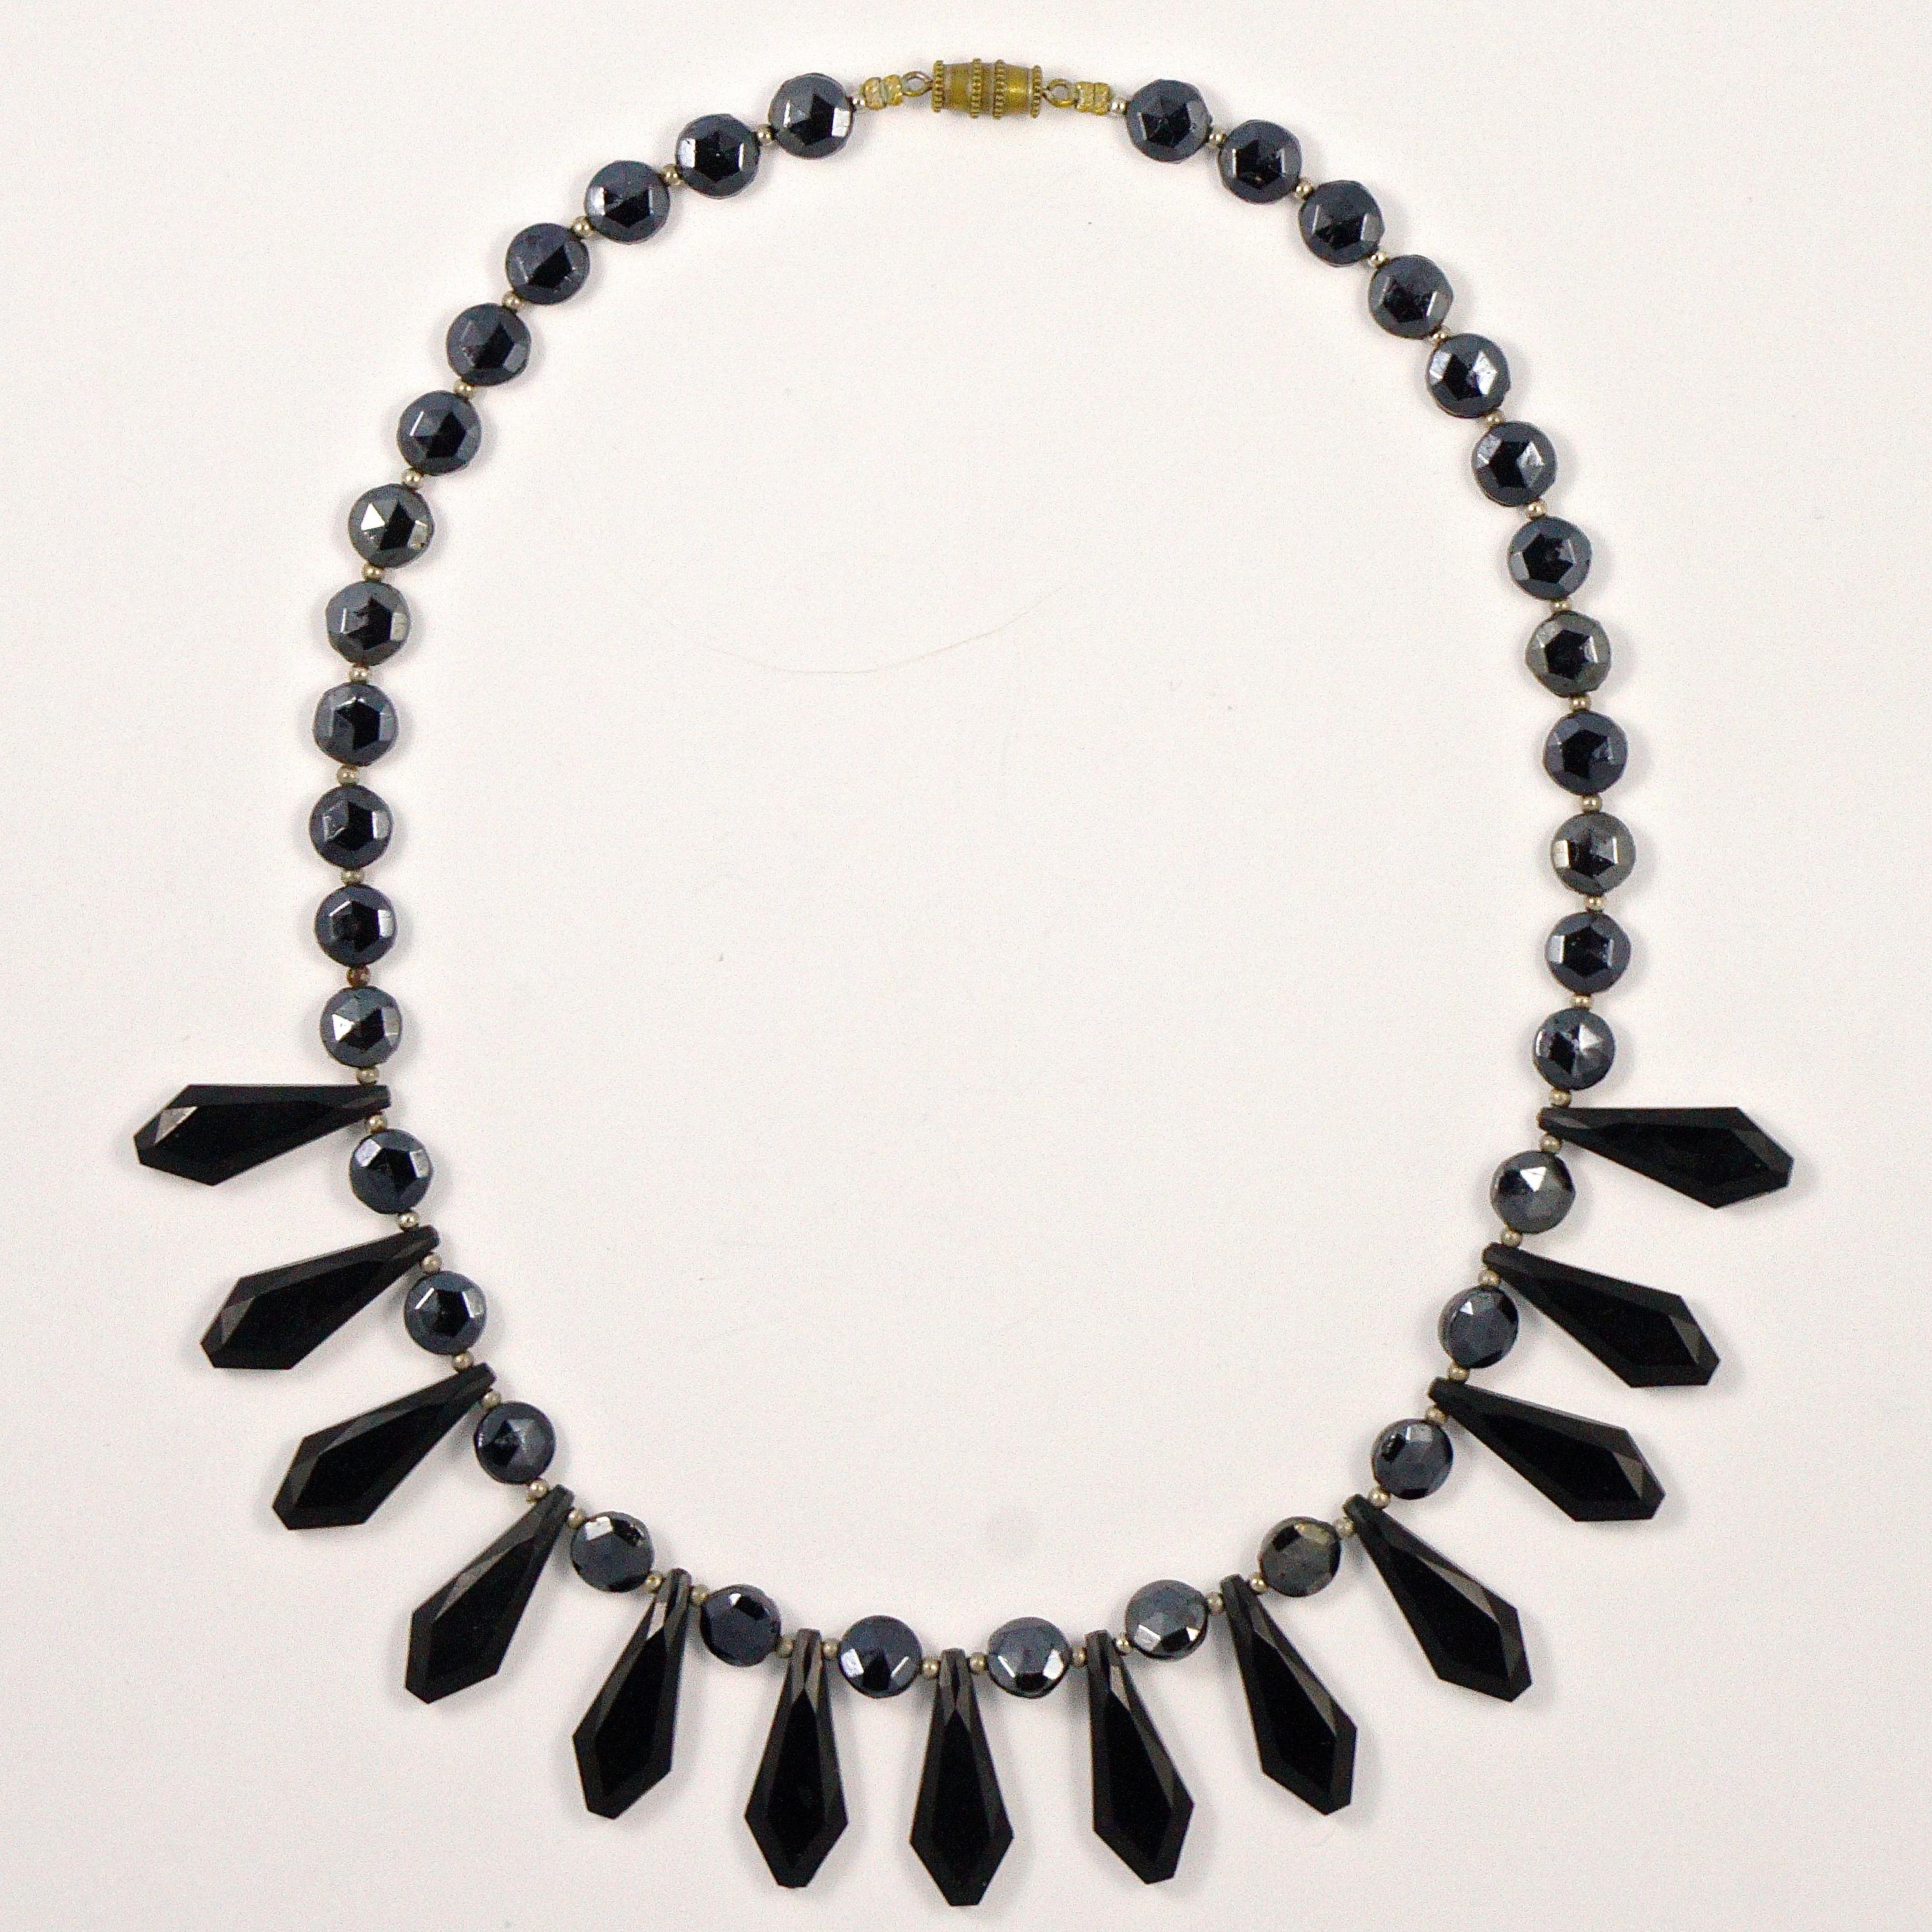 
Art Deco French jet fringe necklace, featuring faceted black glass drops and dark grey round beads, interspersed with small silver tone beads. The necklace closes with a barrel clasp. Measuring length 41cm / 16.1 inches, the drops are length 2.3cm